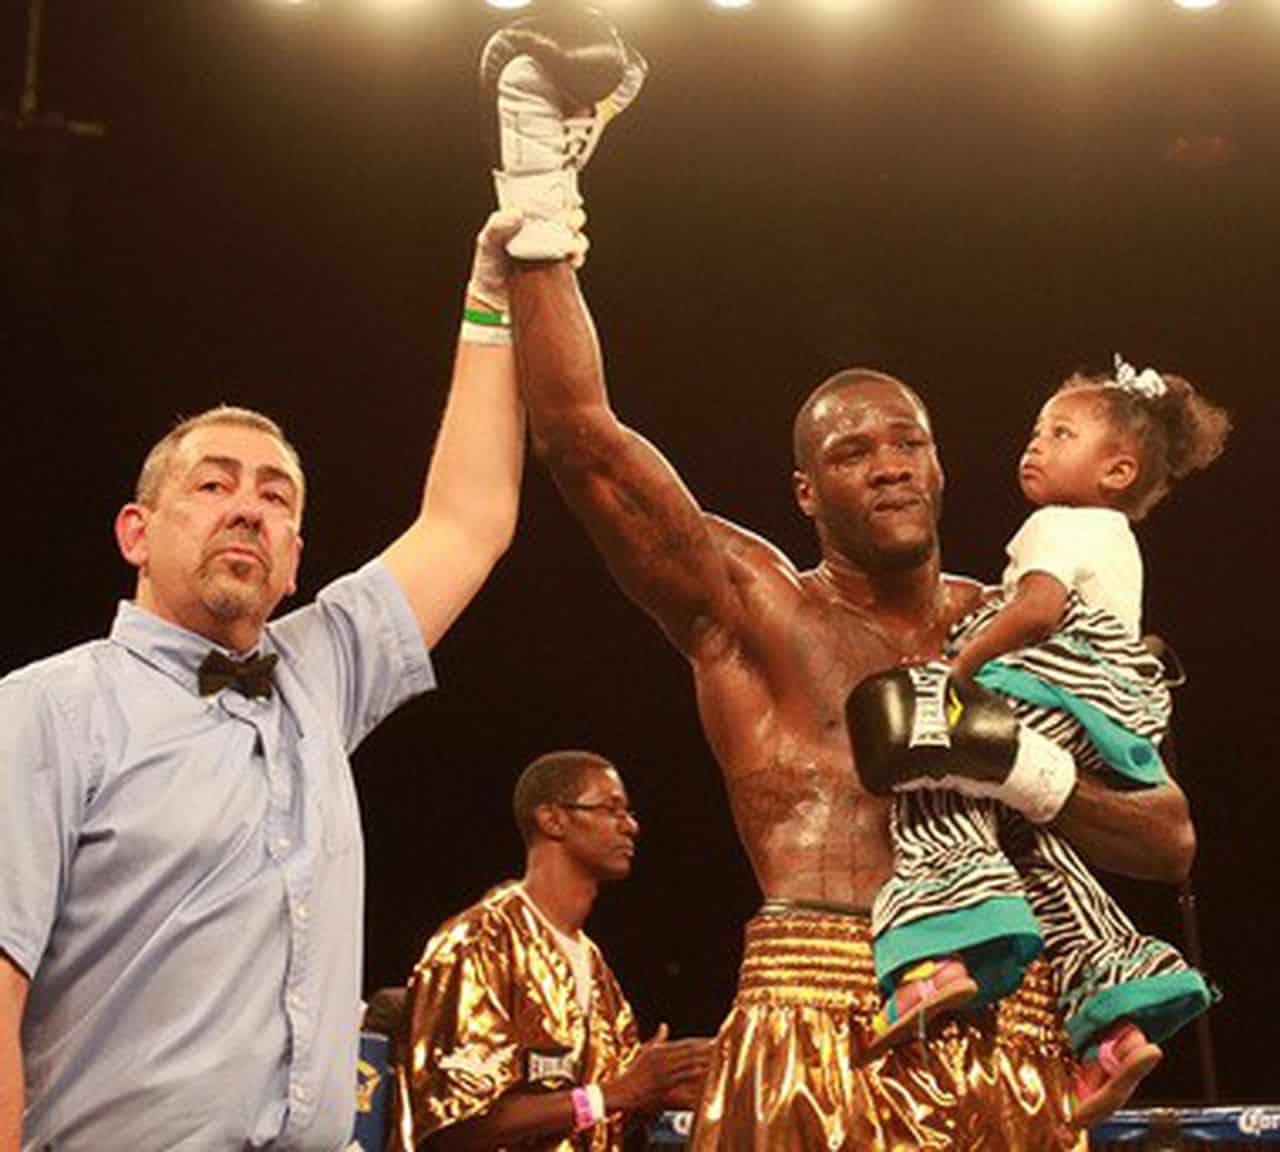 Deontay Wilder sharing his victory with his child